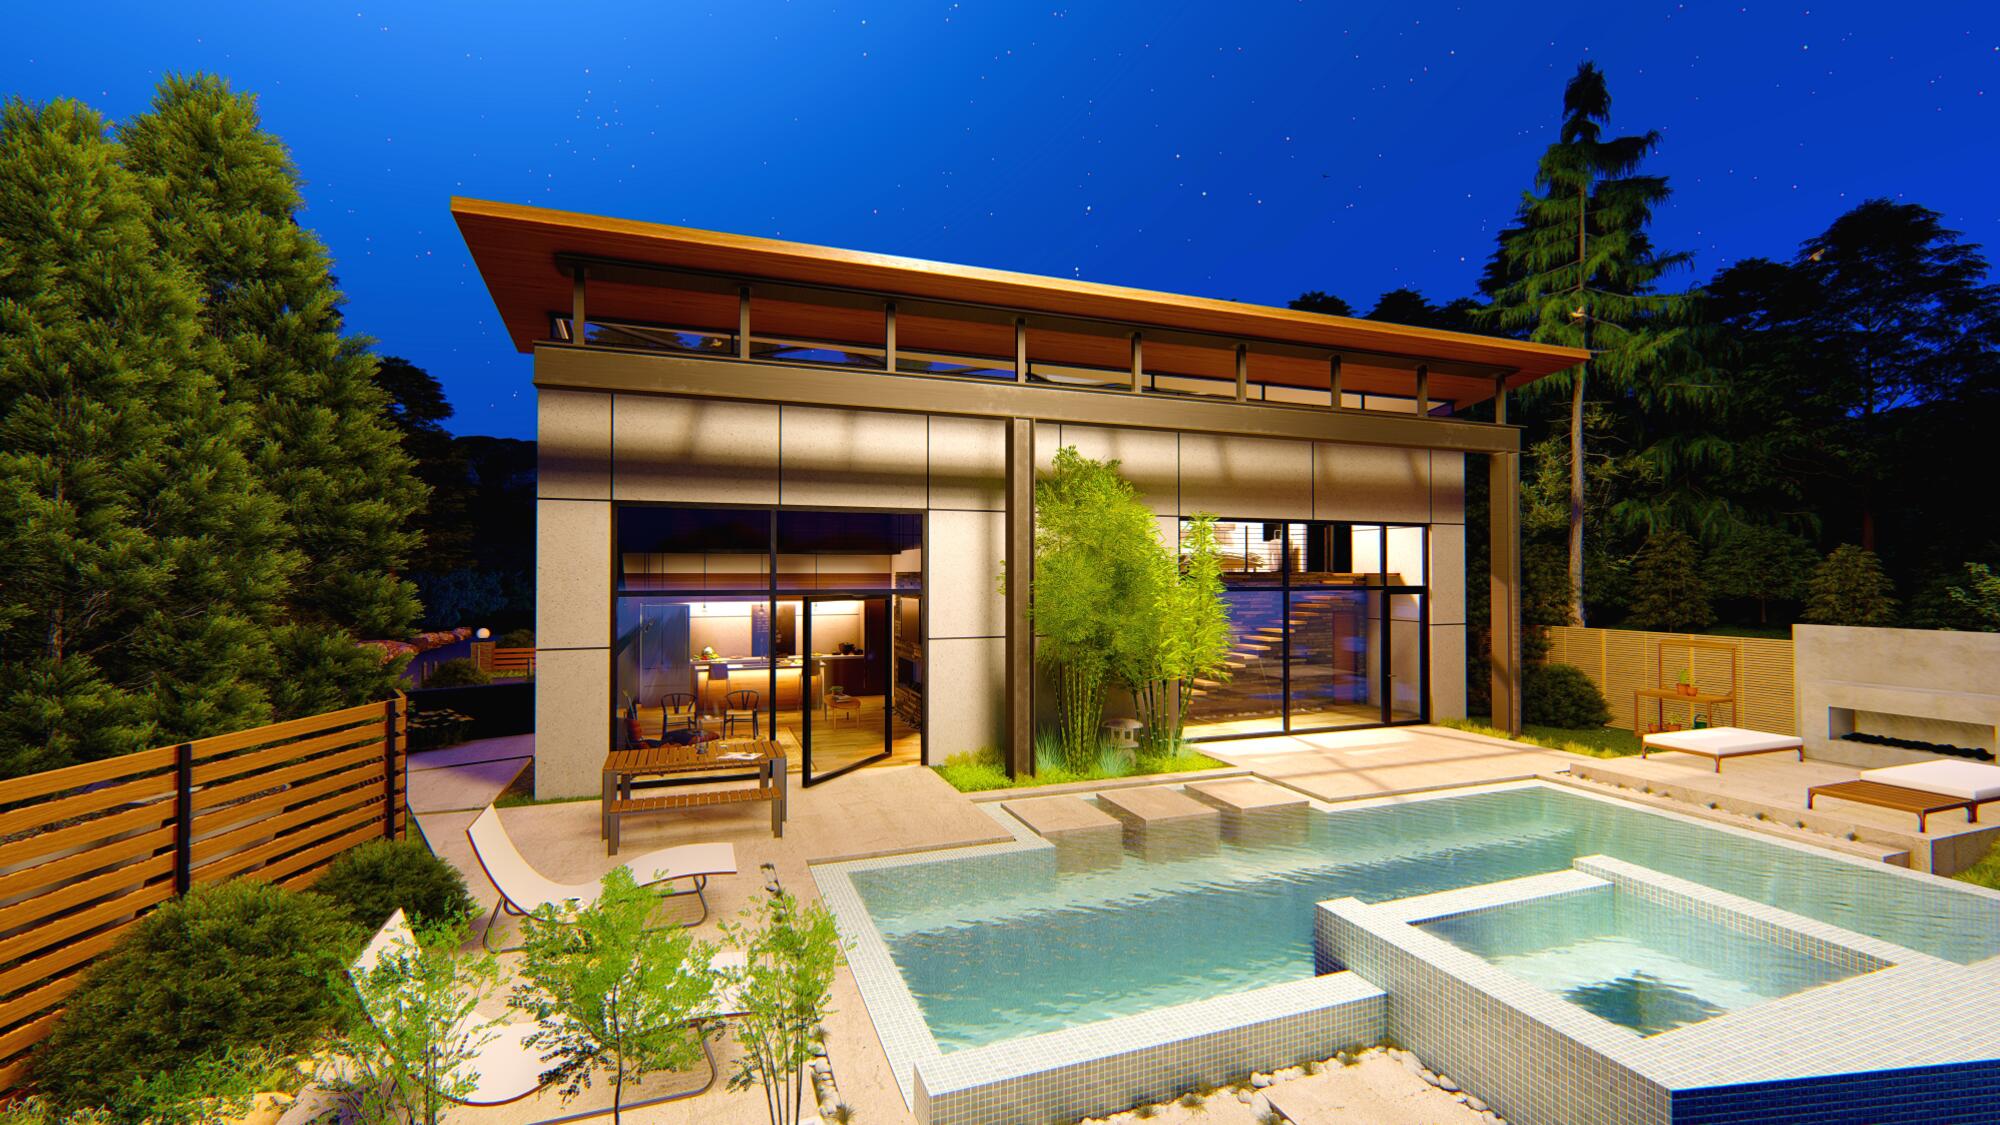 The Impact of Pool Design on Home Resale Value